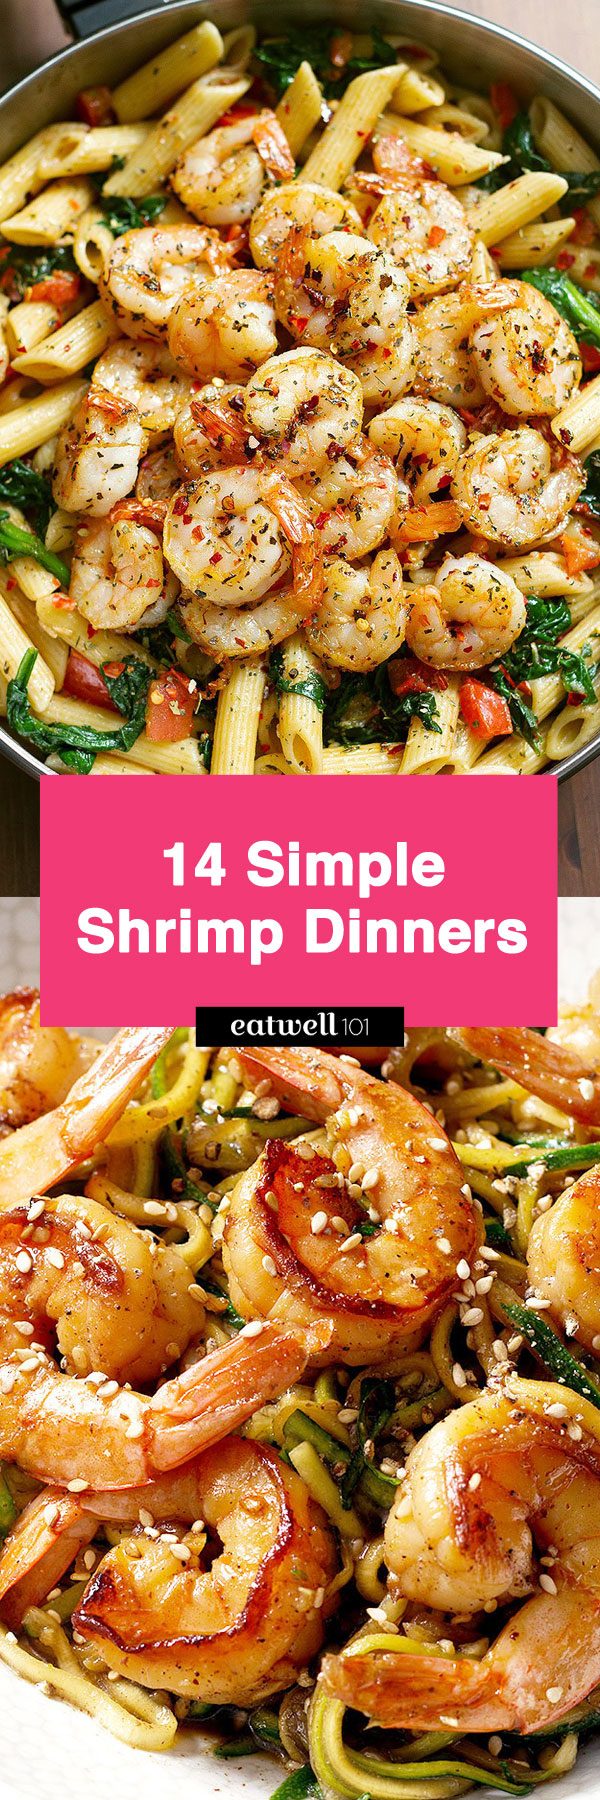 Simple Shrimp Dinners - Quick and simple shrimp recipes for any night of the week!